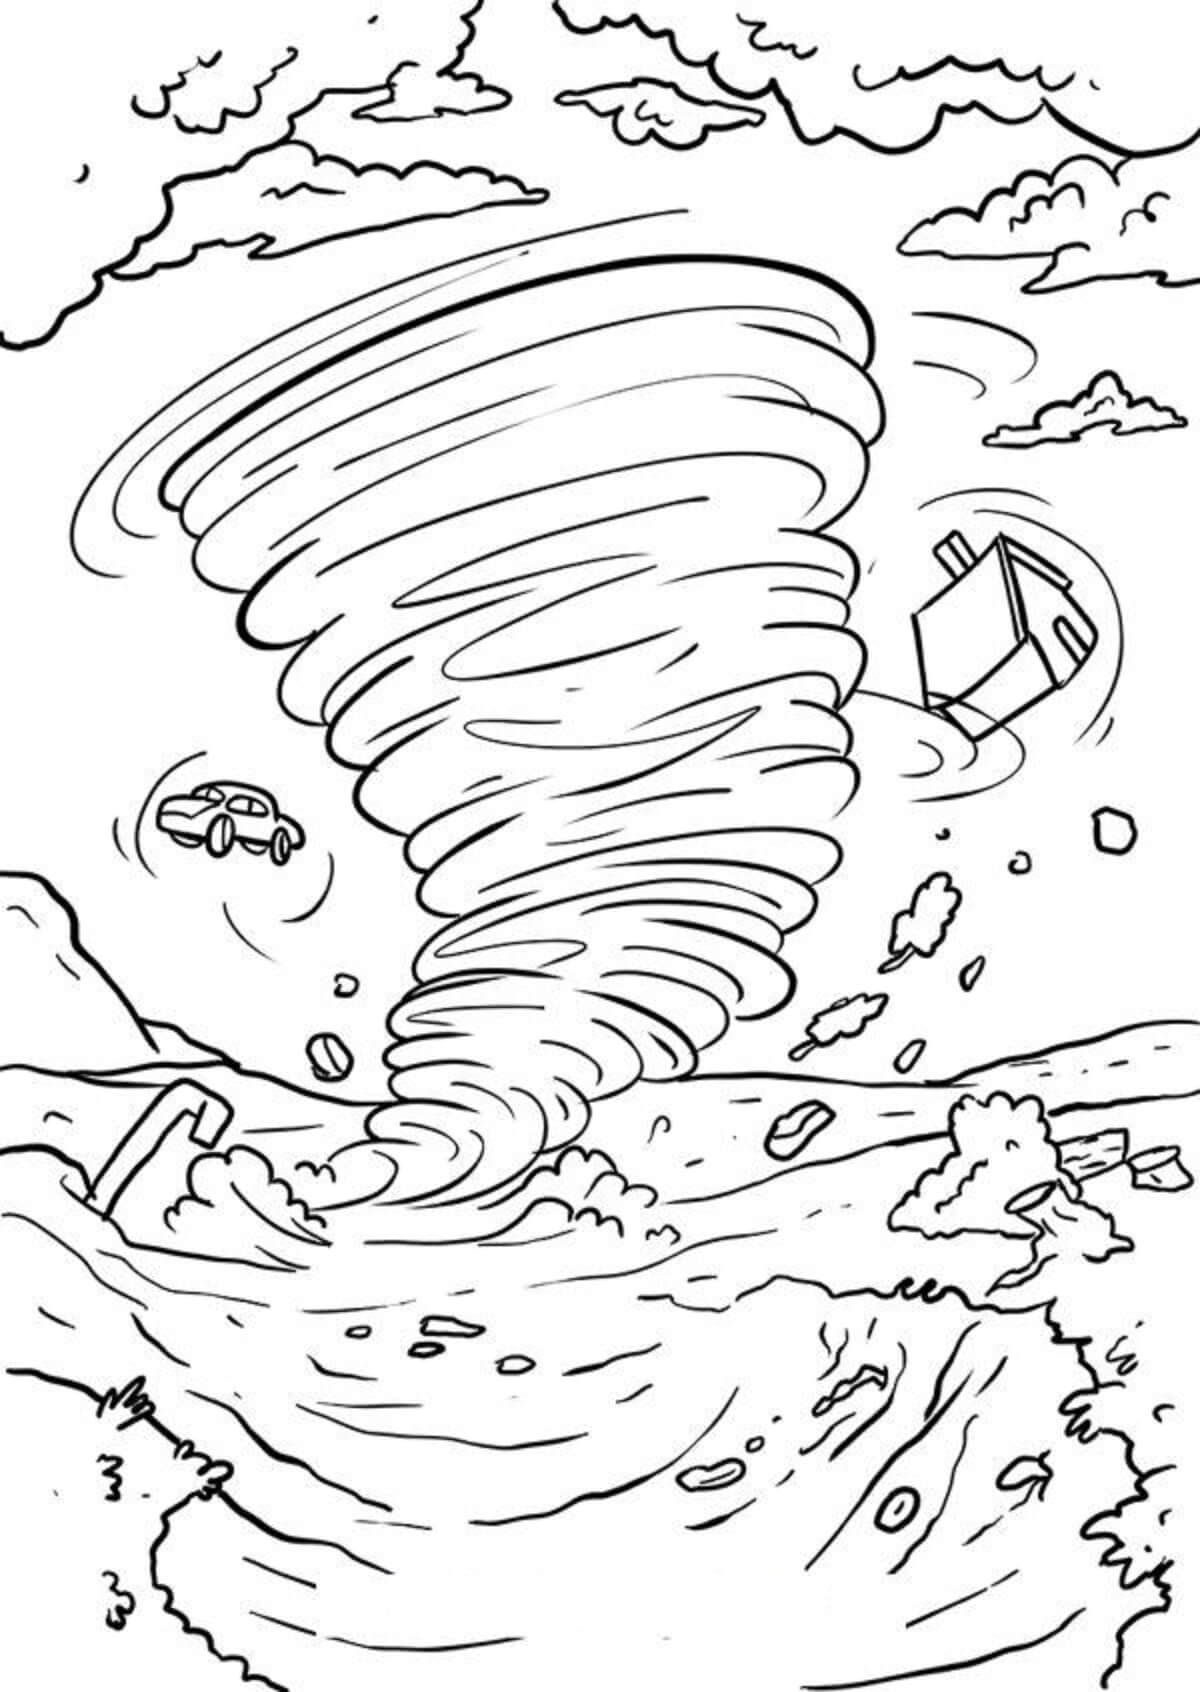 Tornade Terrible coloring page